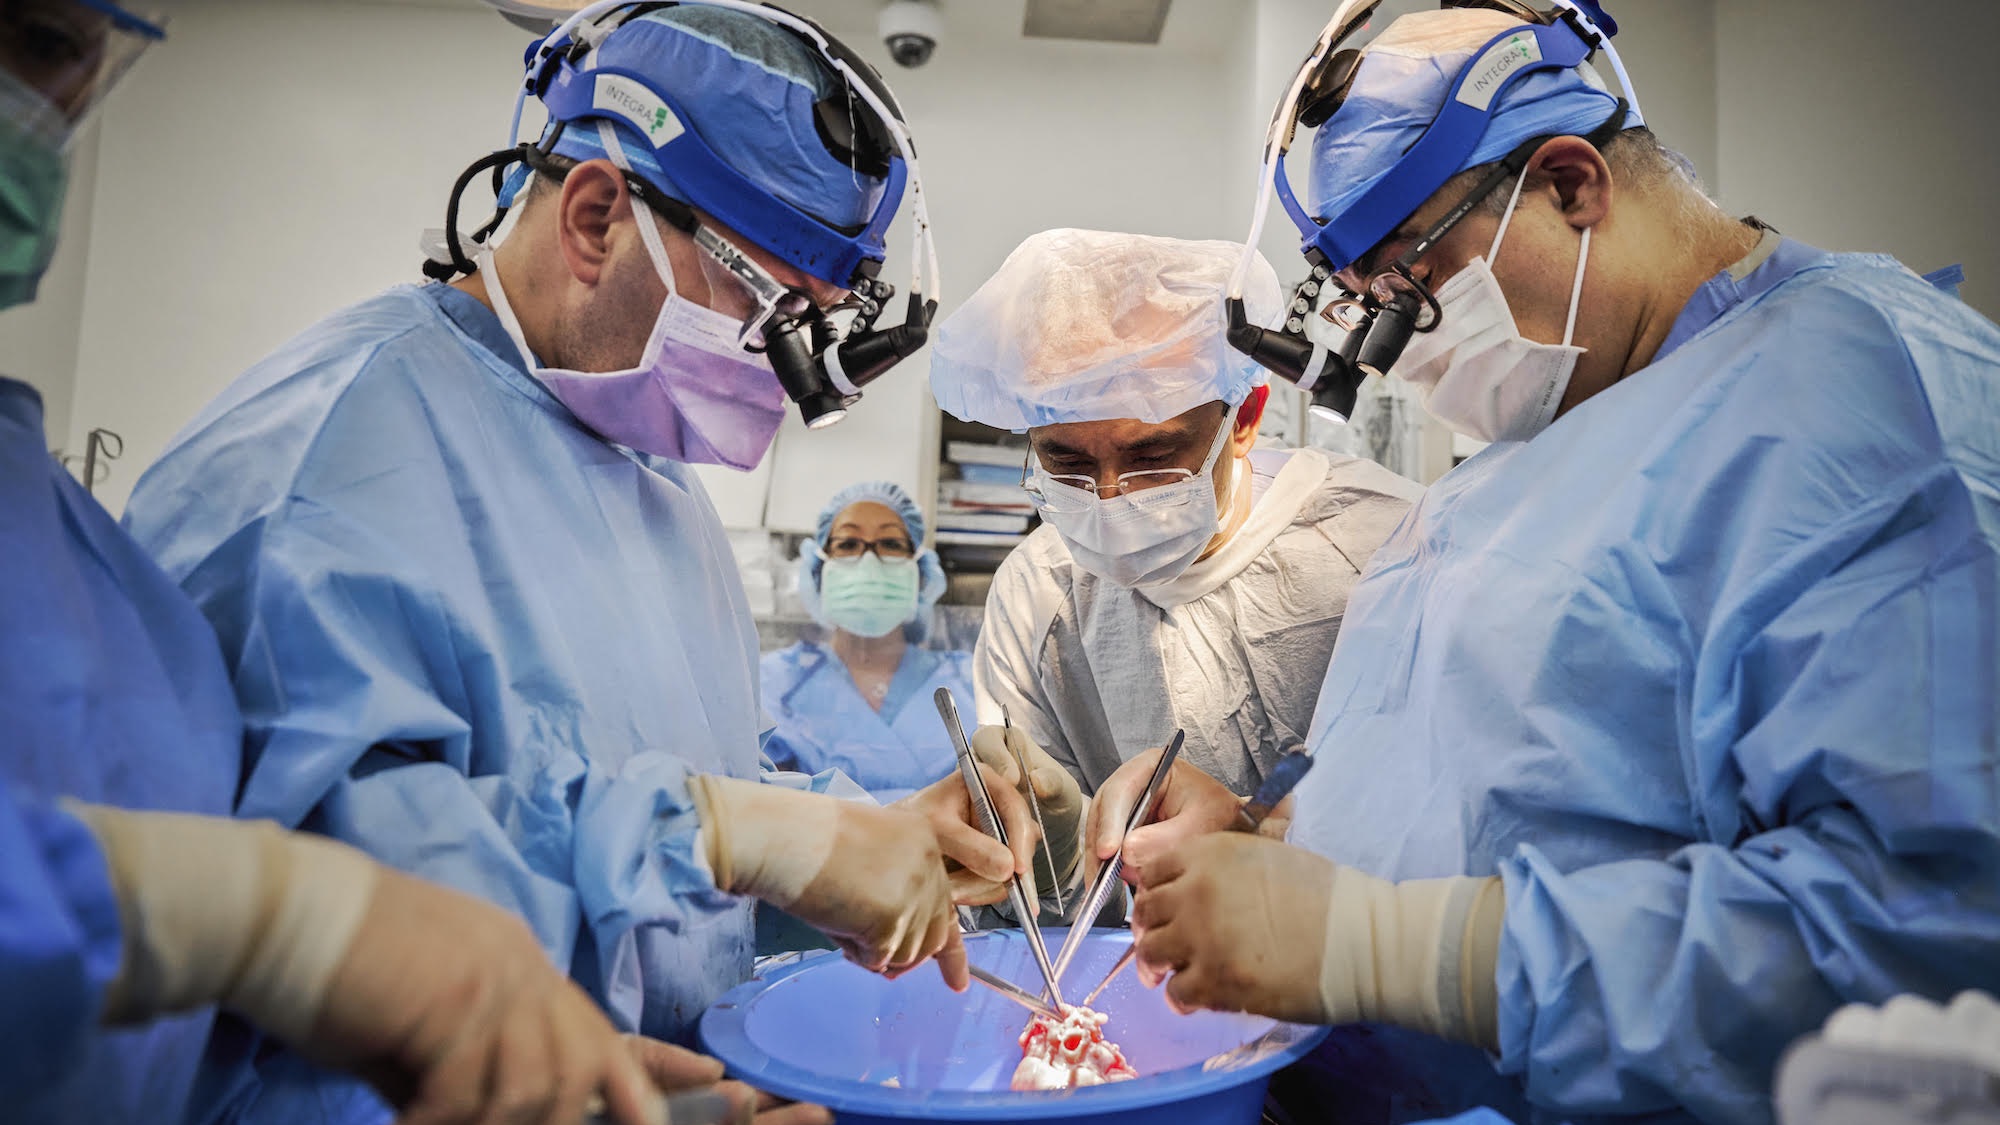 Surgeons perform a transplant operation on a human patient using a pig's heart.